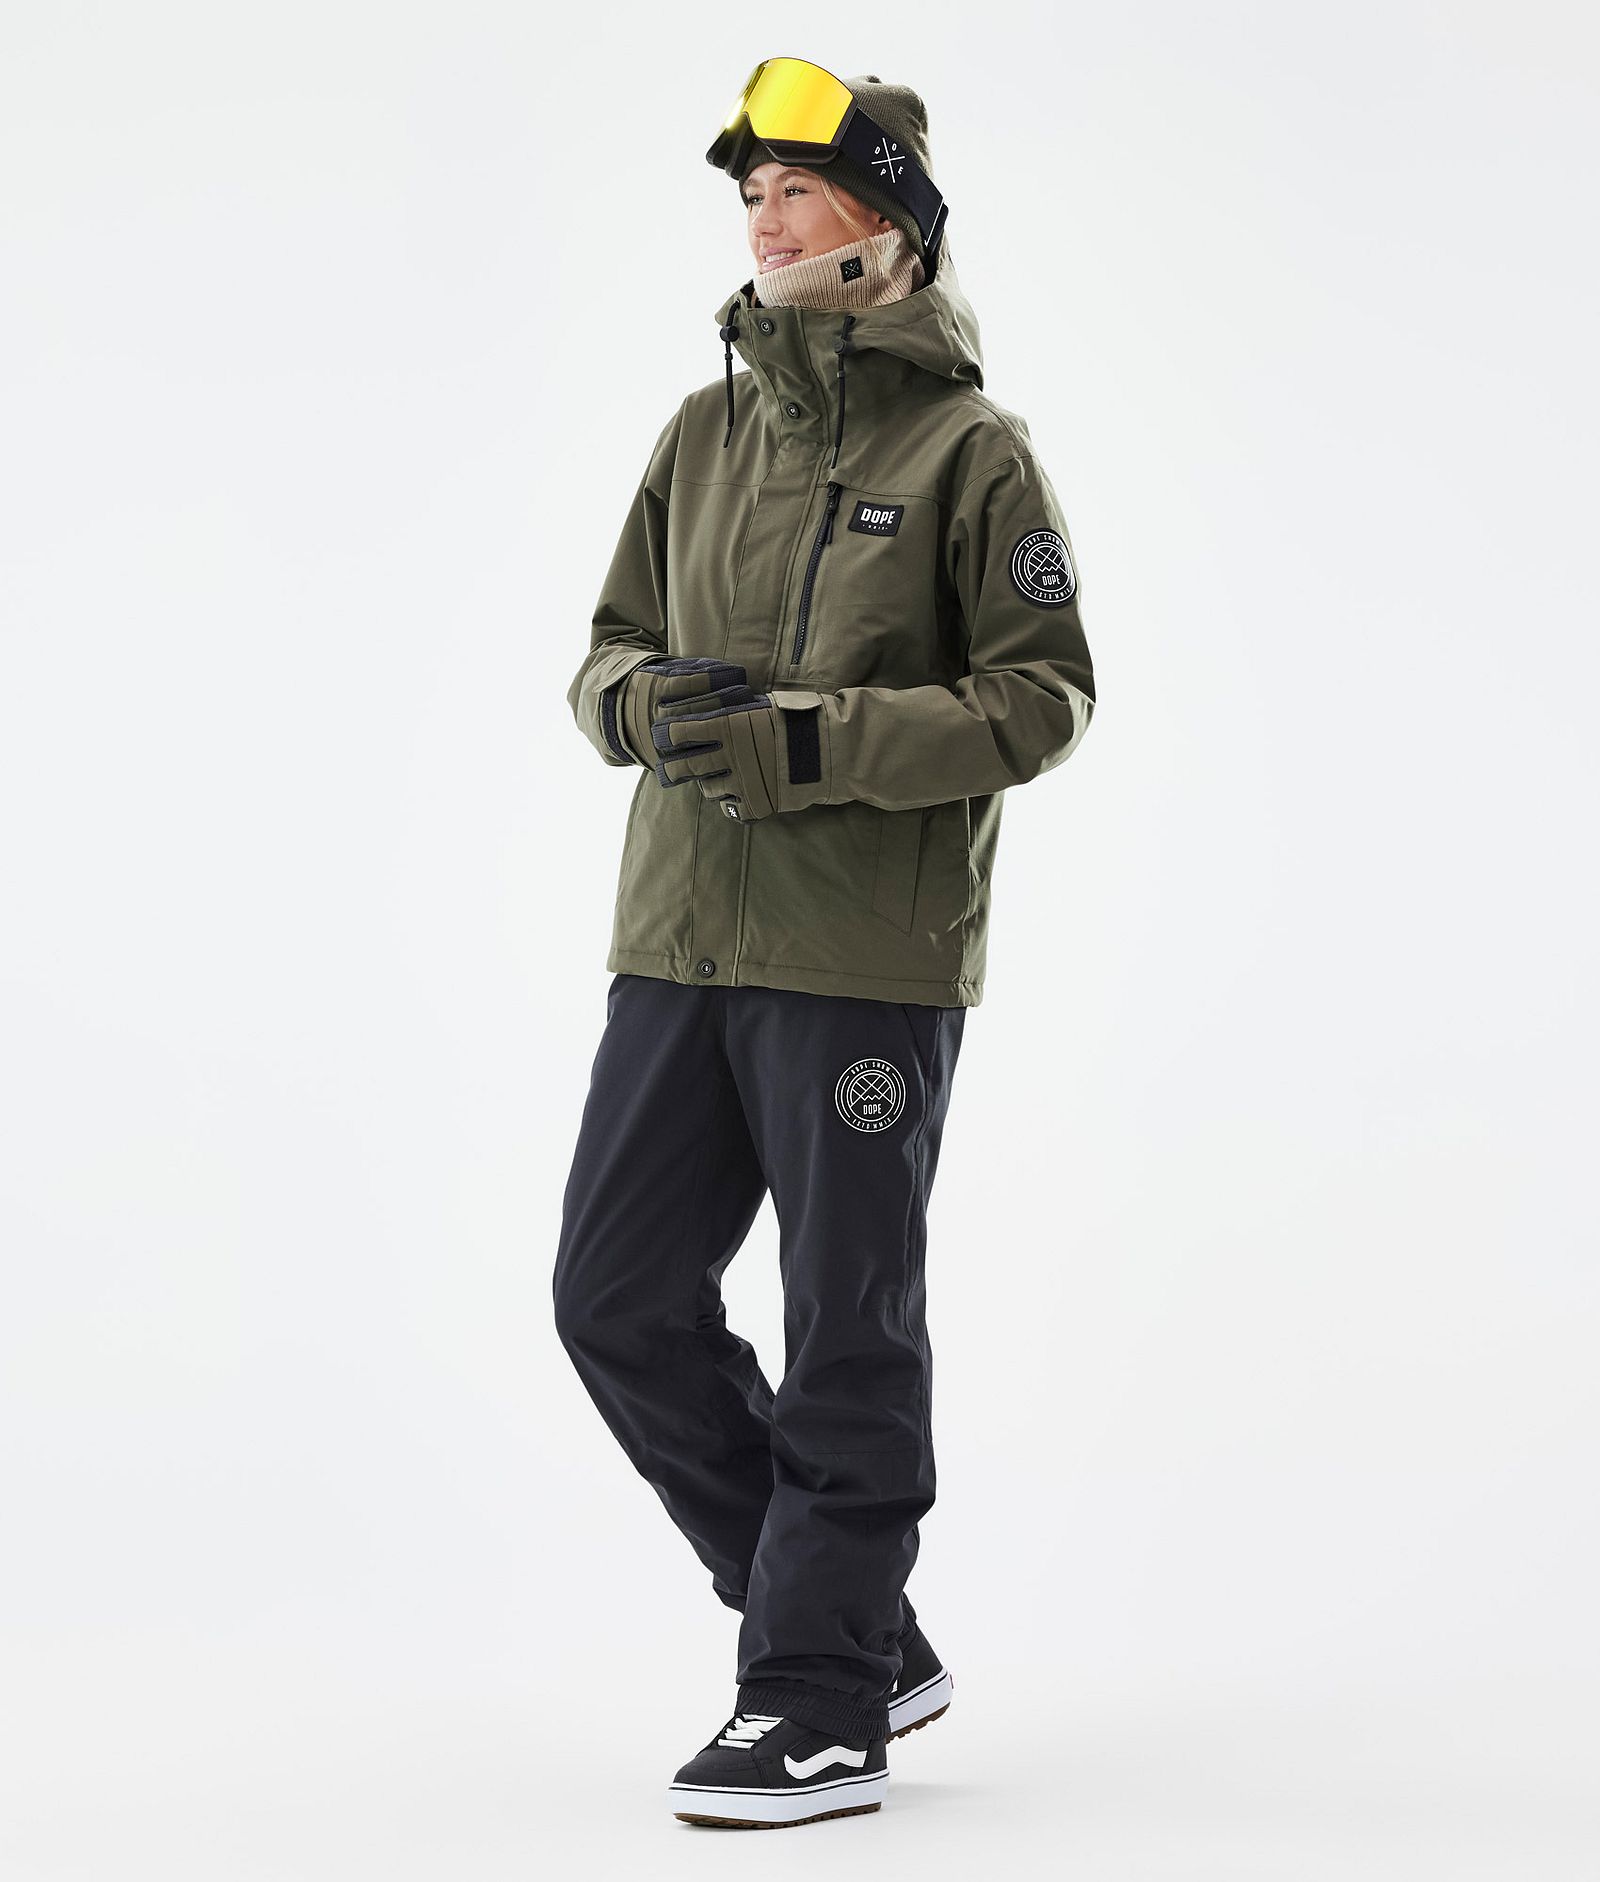 Dope Blizzard W Full Zip Giacca Snowboard Donna Olive Green